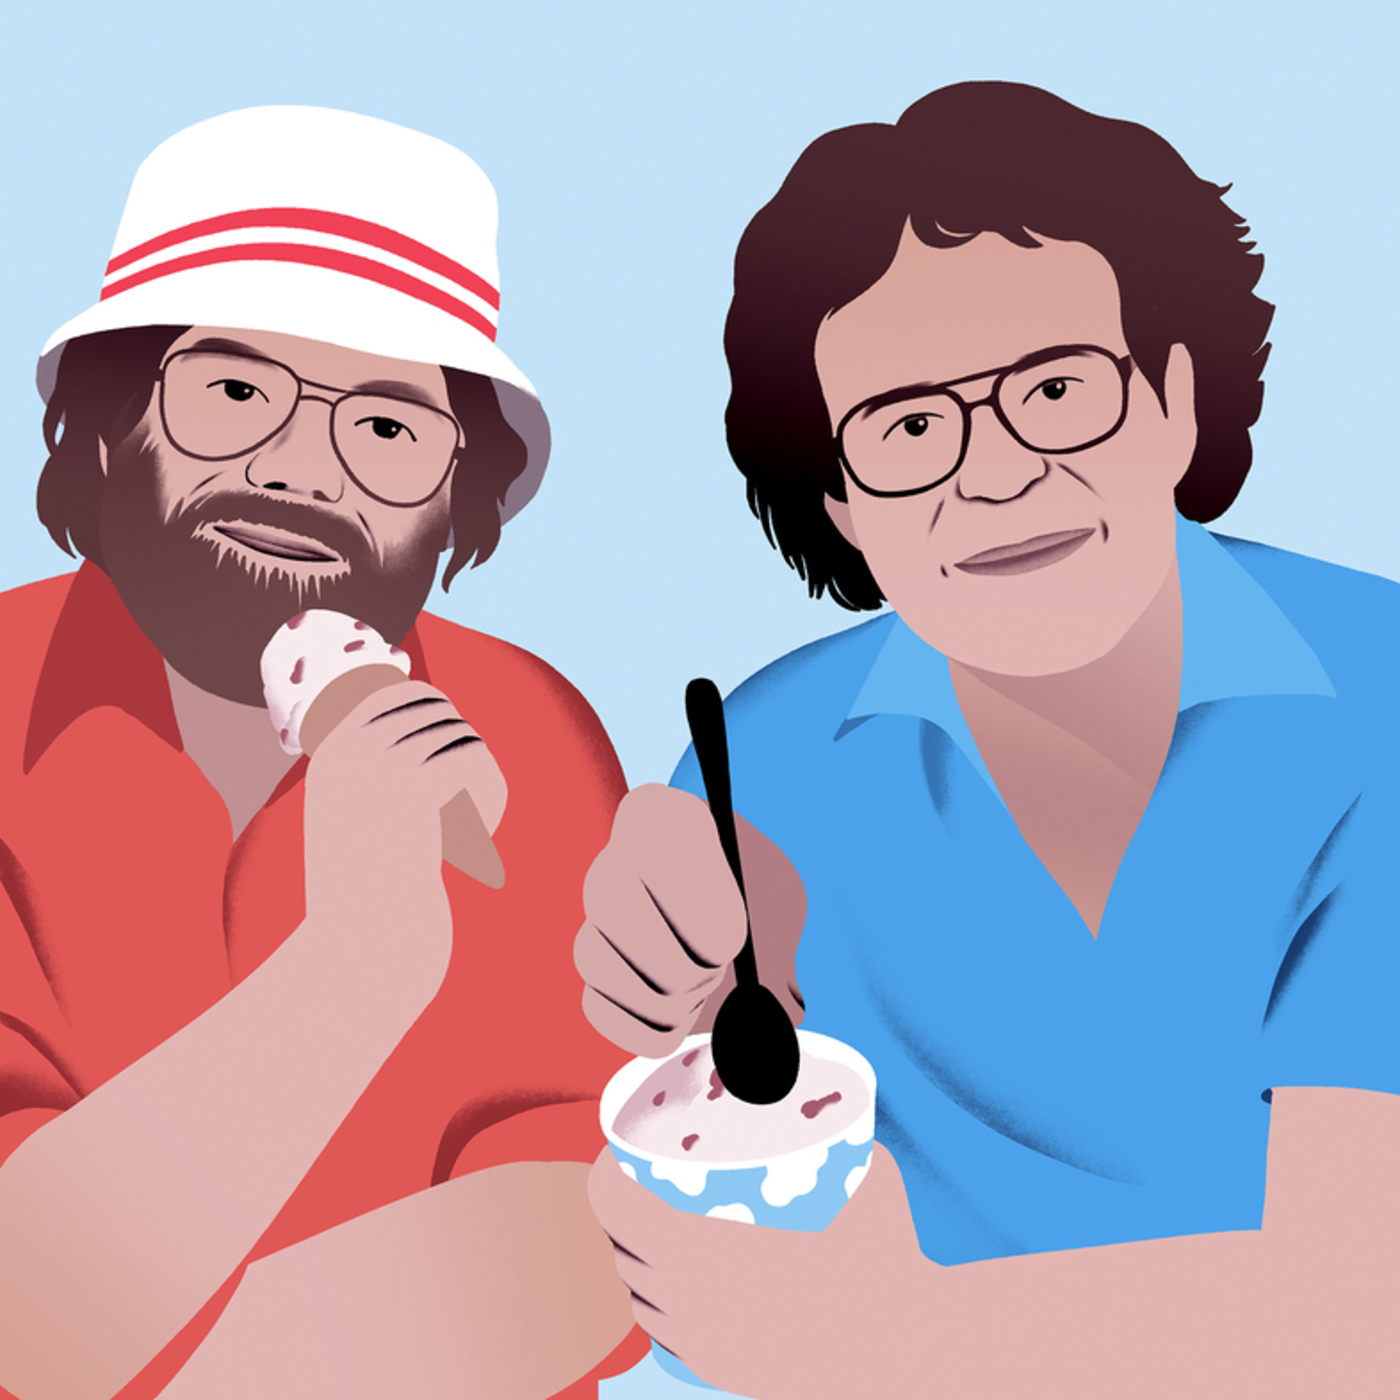 Ben & Jerry's: Ben Cohen And Jerry Greenfield